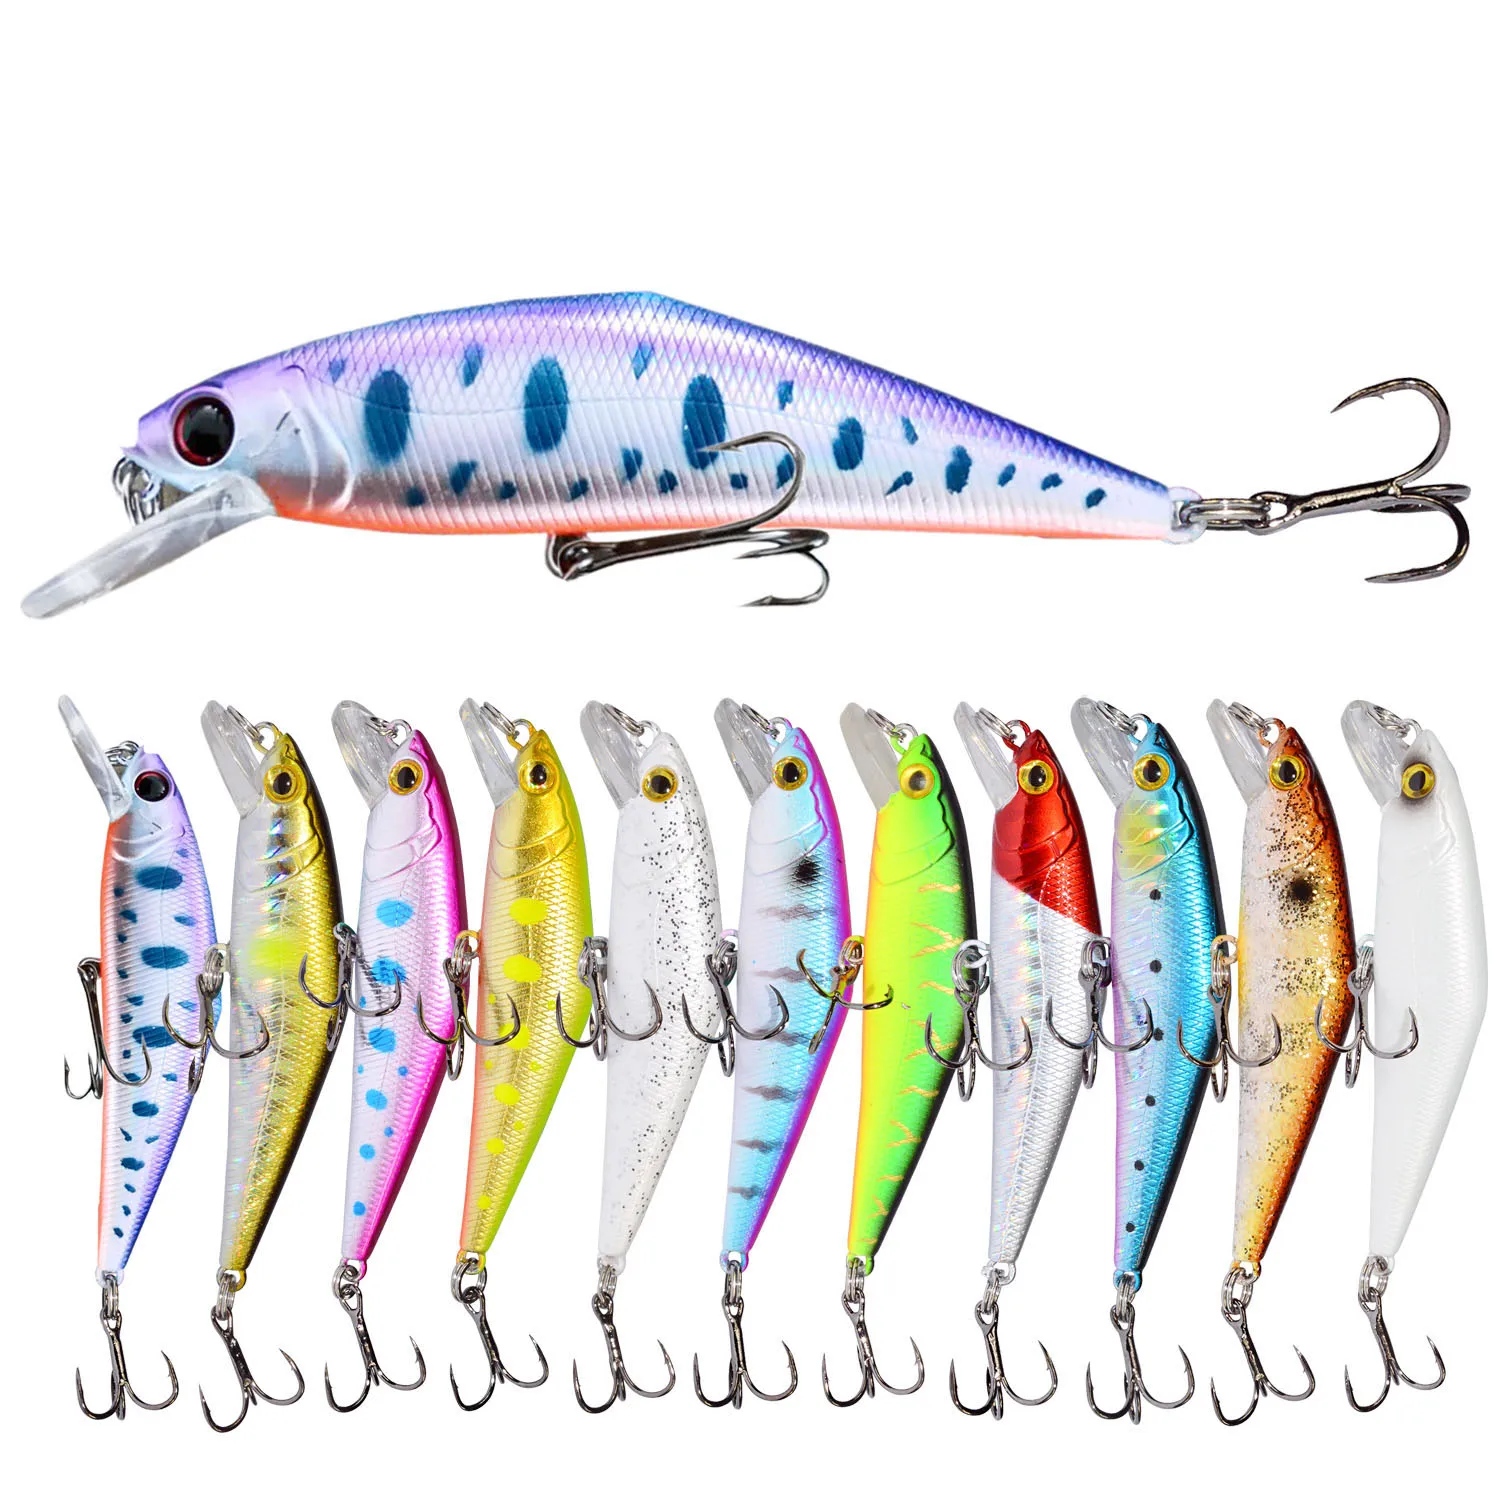 

Hard lures 85mm/14g Minnow Fishing lures Peche Bass Trolling Isca Artificial Hard Bait Crankbait Carp Wobbler For Fishing Tackle, 11colors